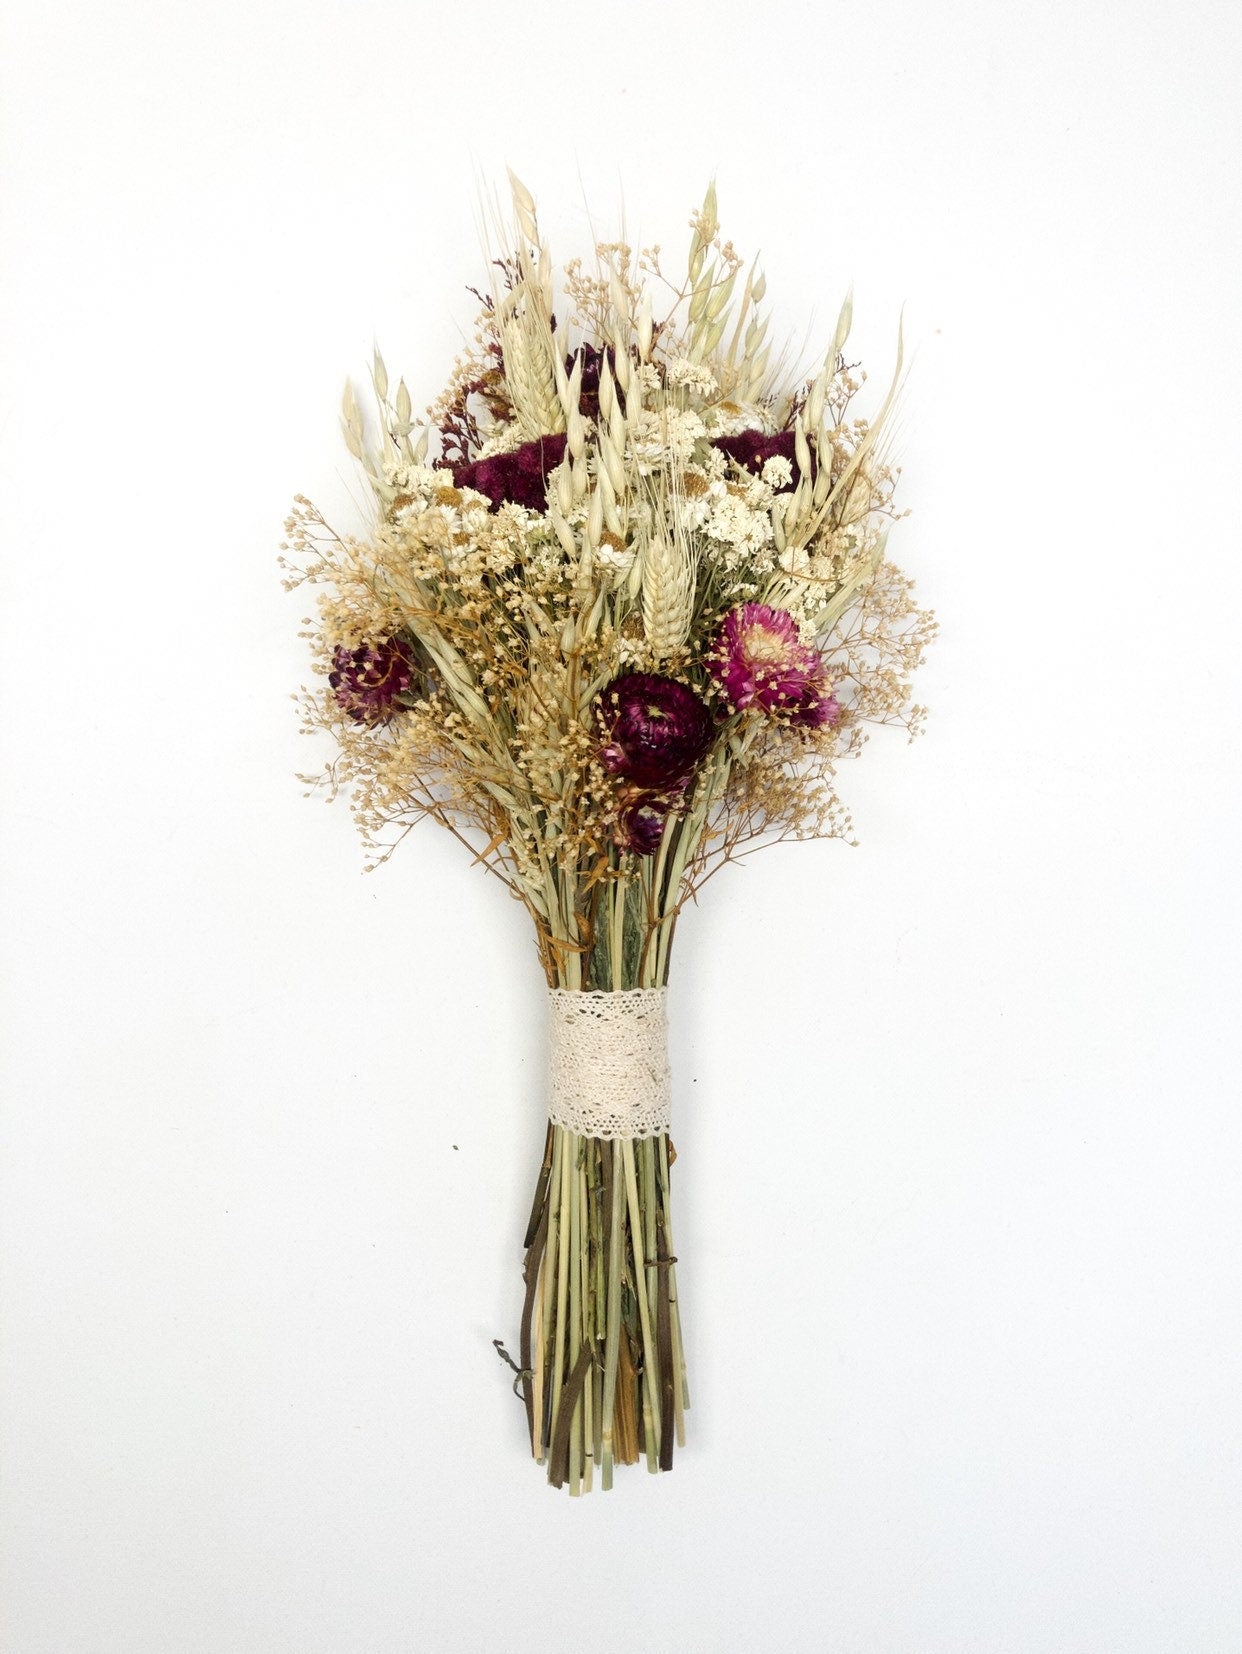 Fall Wedding Bouquet, Dried Flowers, Bridal, Strawflowers, Oats, Coxcomb, Celosia, Red, Burgundy, Beige, White, Simple, Gentle, Wheat